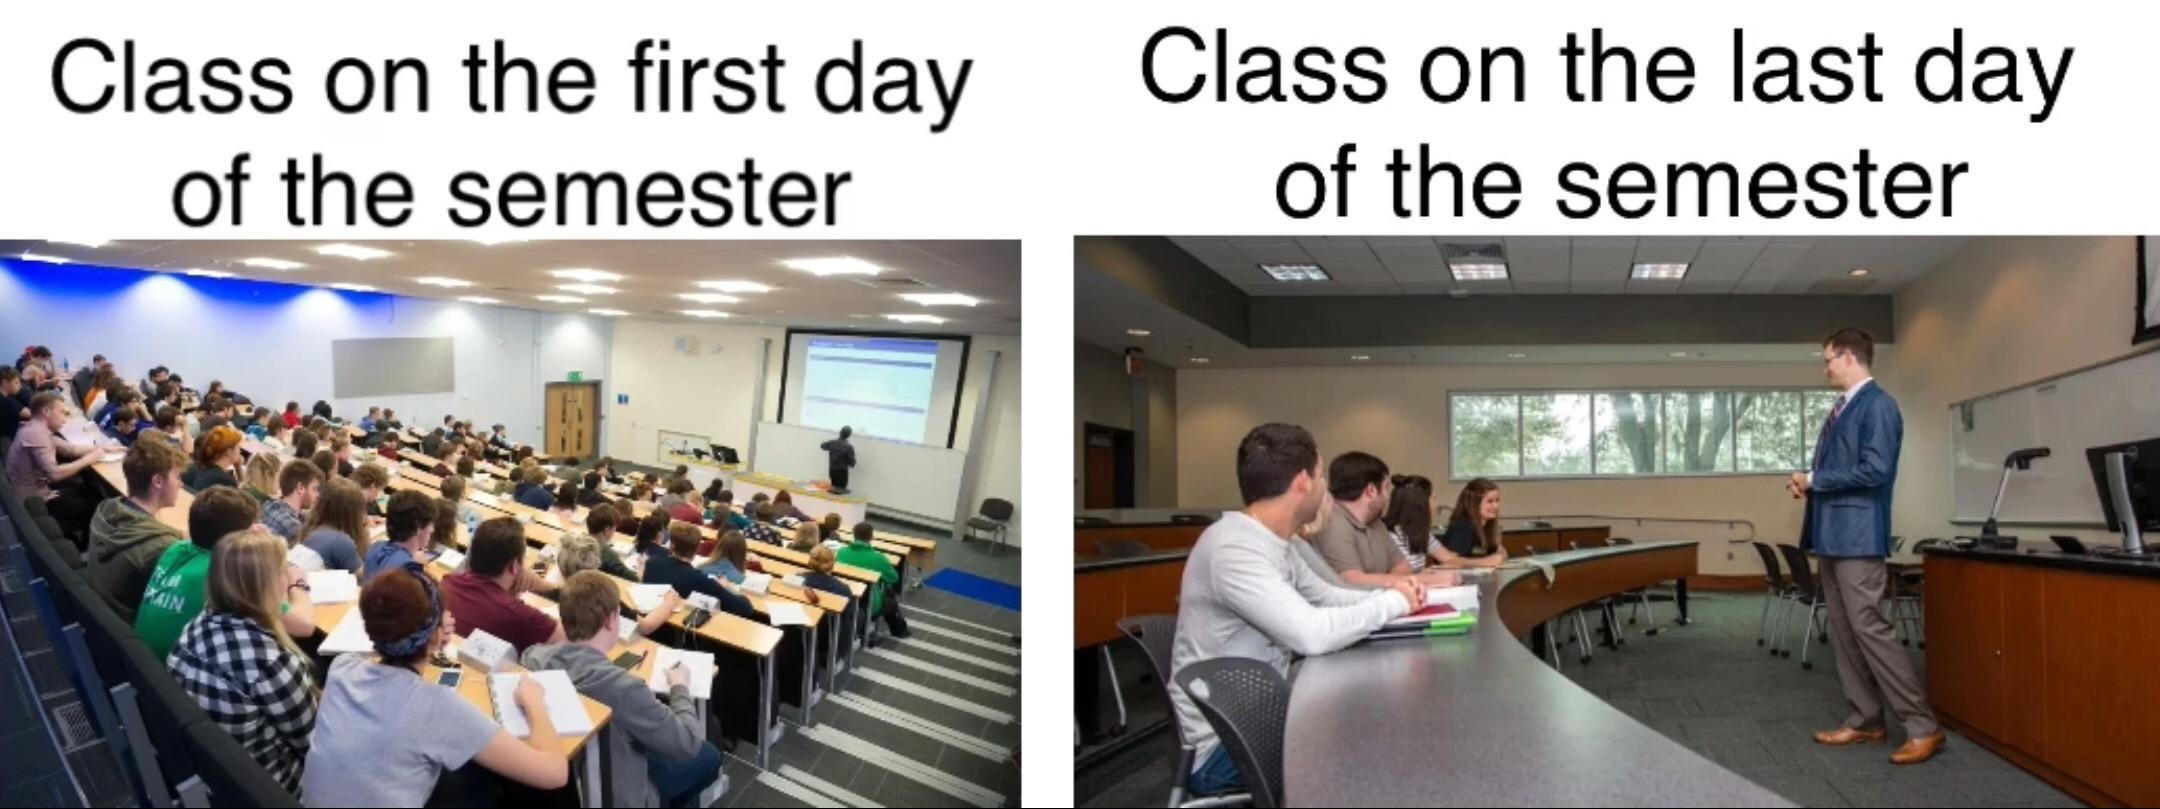 dank memes - uk universities - Class on the first day of the semester F Fja Kain Class on the last day of the semester